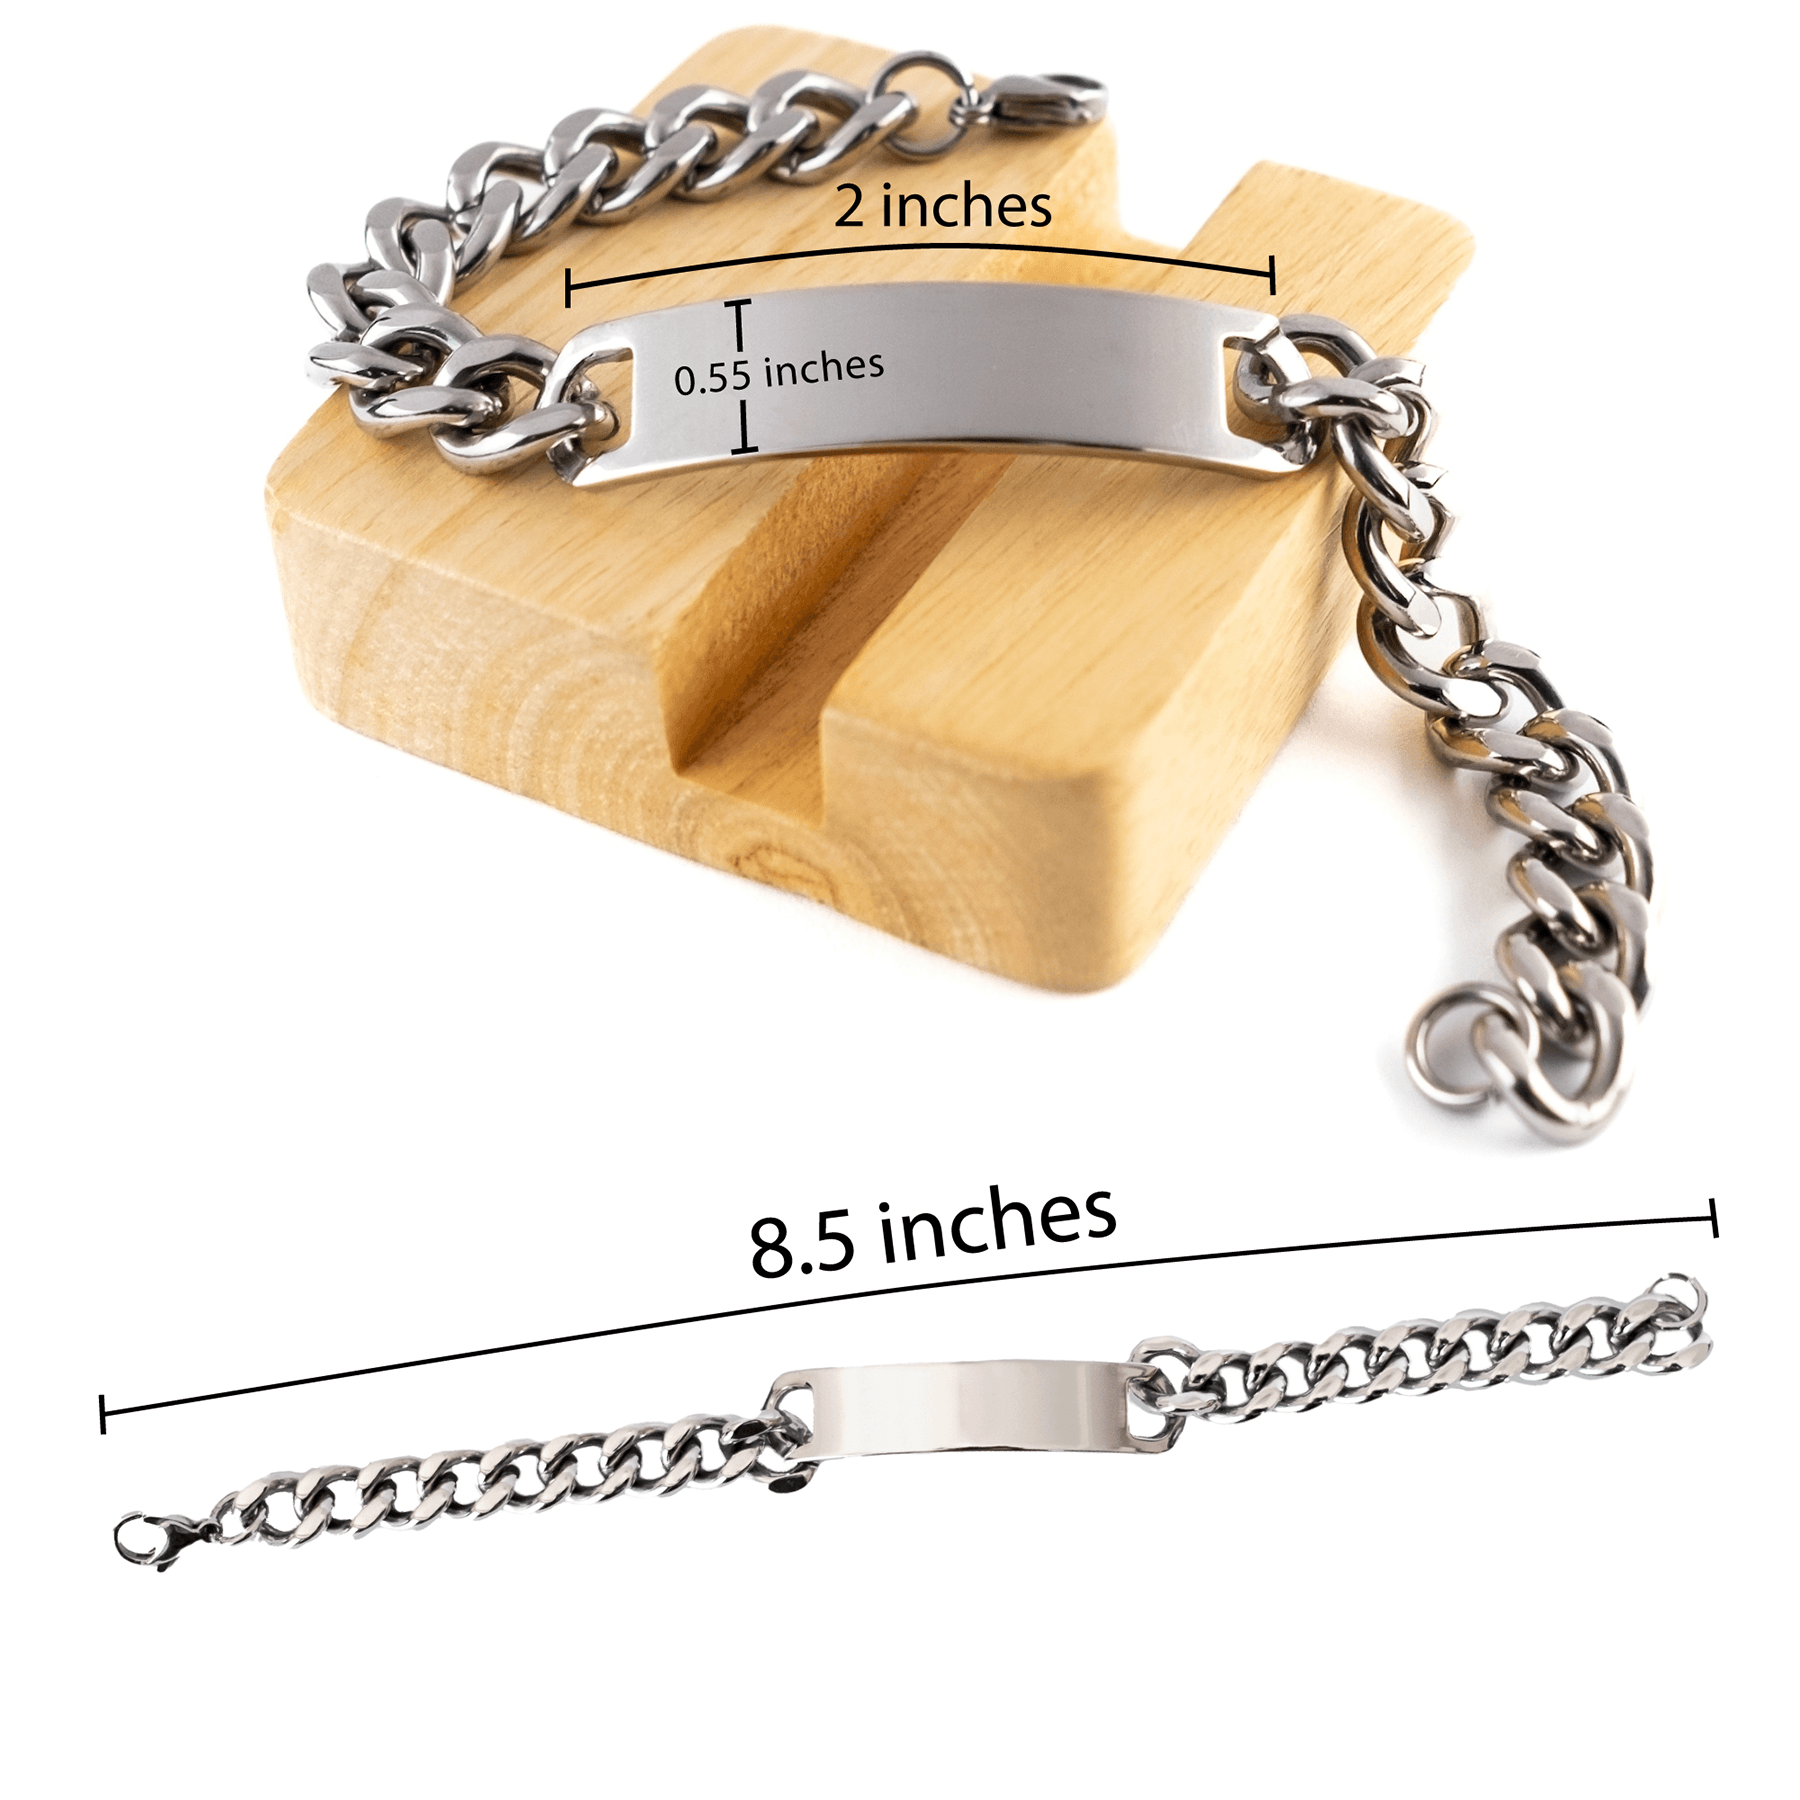 Payroll Clerk Cuban Chain Link Engraved Bracelet - Thanks for being who you are - Birthday Christmas Jewelry Gifts Coworkers Colleague Boss - Mallard Moon Gift Shop